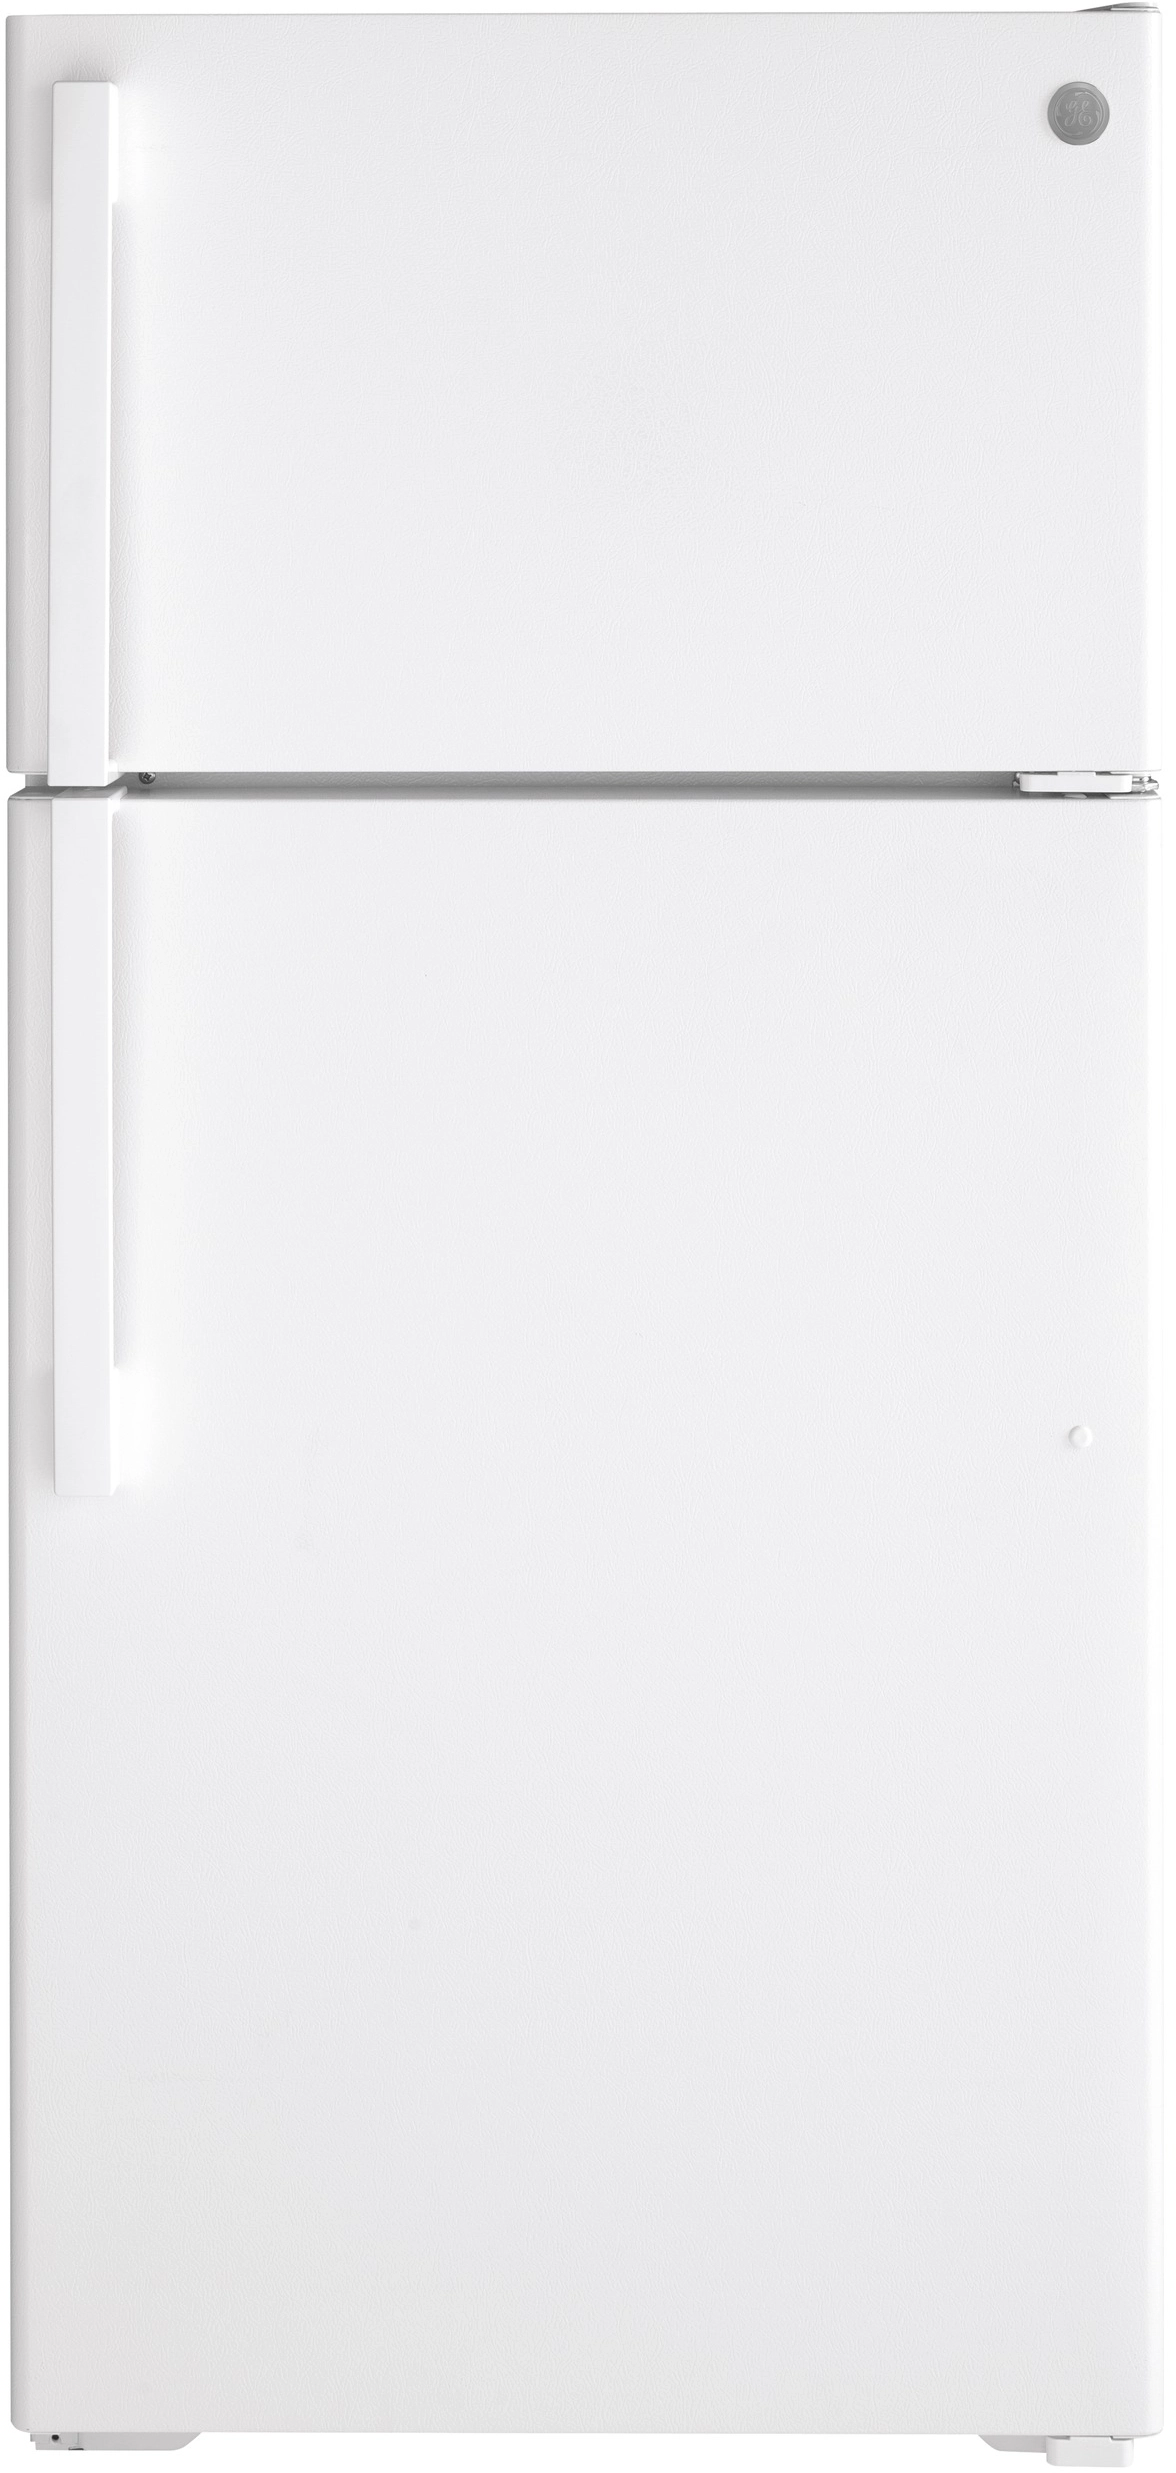 General Electric Top Freezer Refrigerator With Handle No Icemaker With Standard Energy 16 Cubic Feet Capacity Wire Shelves